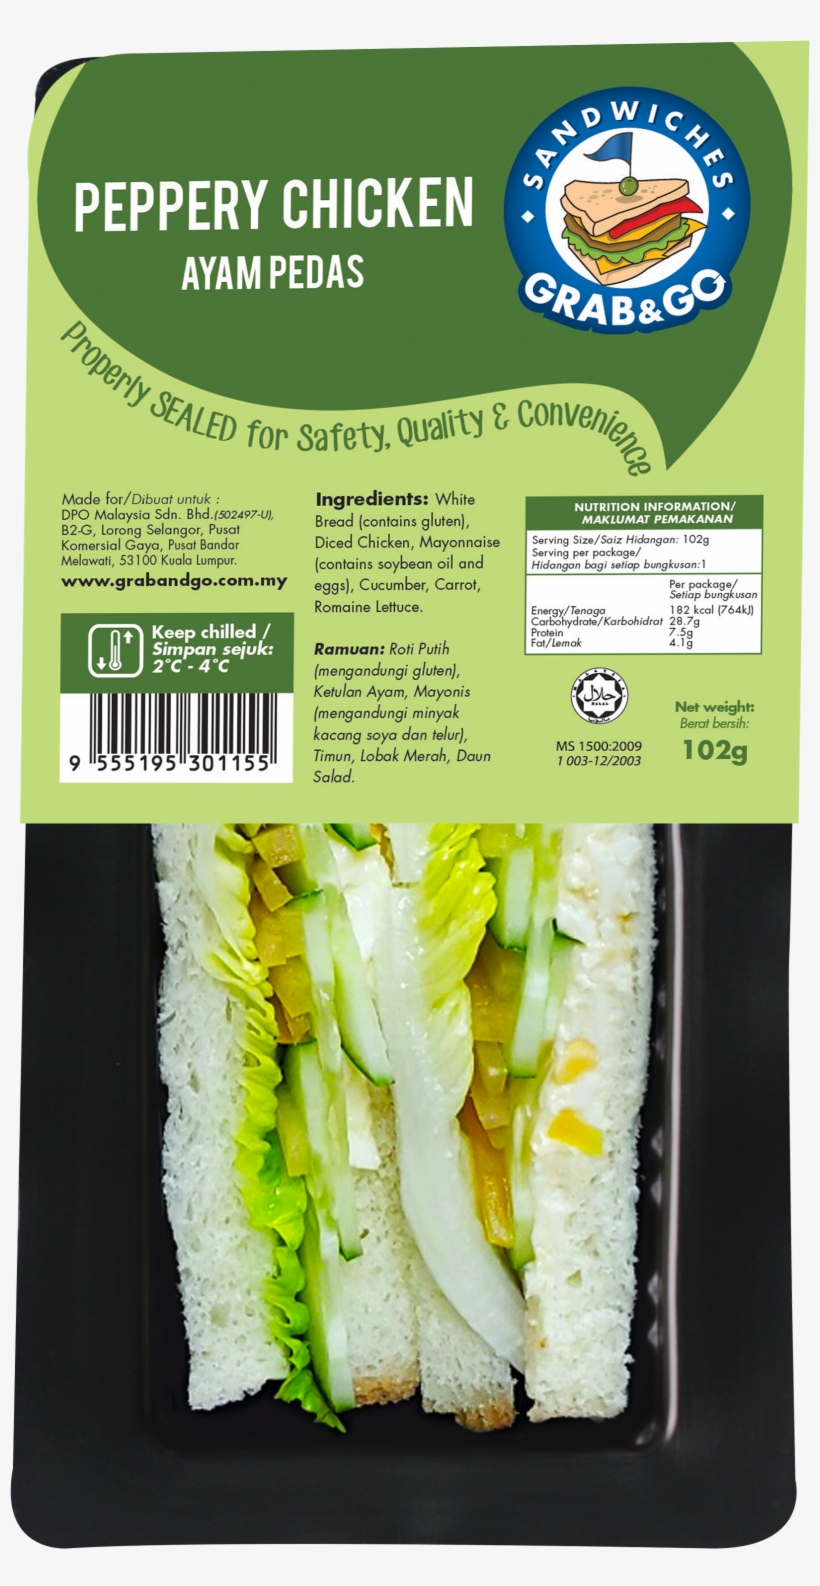 Suppliers Of 10 Davinci Gourmet Brand Sweet Sauce Products - Grab N Go Sandwich Png, transparent png #6280784